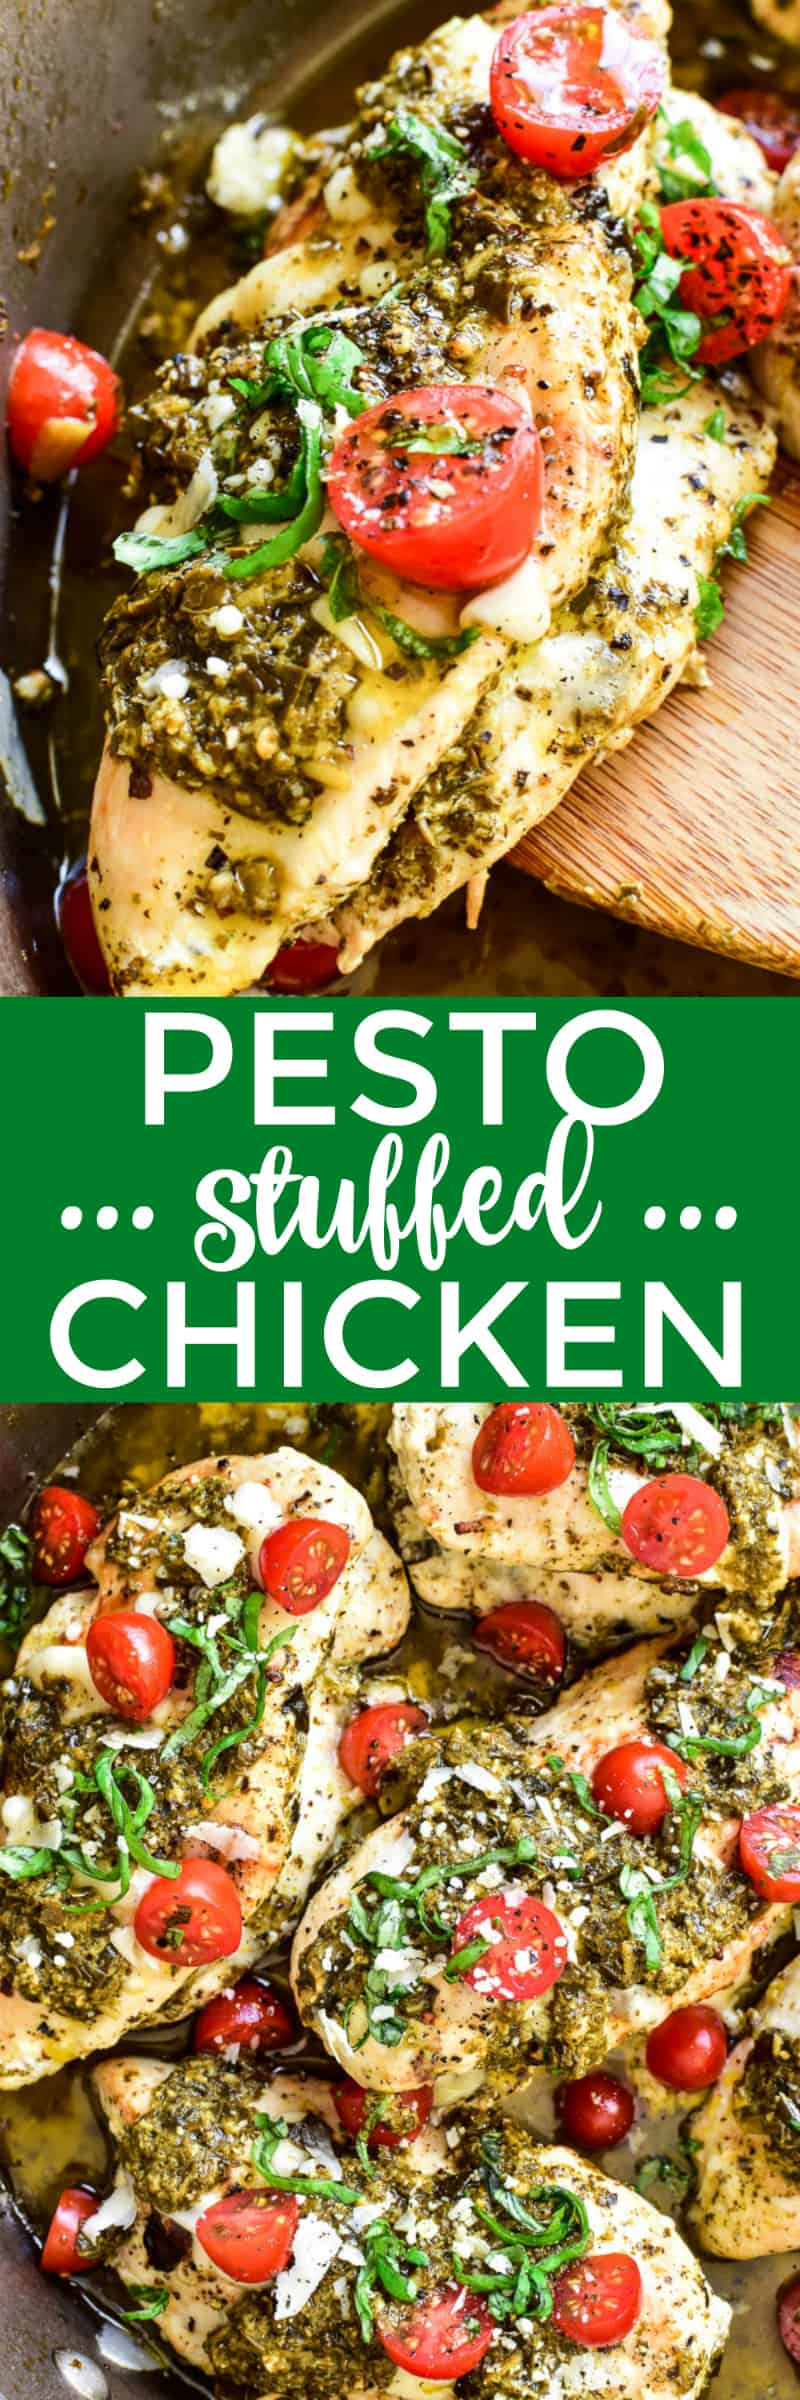 This Cheesy Pesto Stuffed Chicken is the ultimate dinner recipe! Ready in 30 minute or less, this dish is packed with flavor and so easy to make. It combines boneless, skinless chicken breasts with basil pesto, grape tomatoes, and two types of cheese. Perfect for weekday dinners or date nights in....if you're looking for an easy, delicious twist on dinner, you'll love this stuffed chicken recipe!